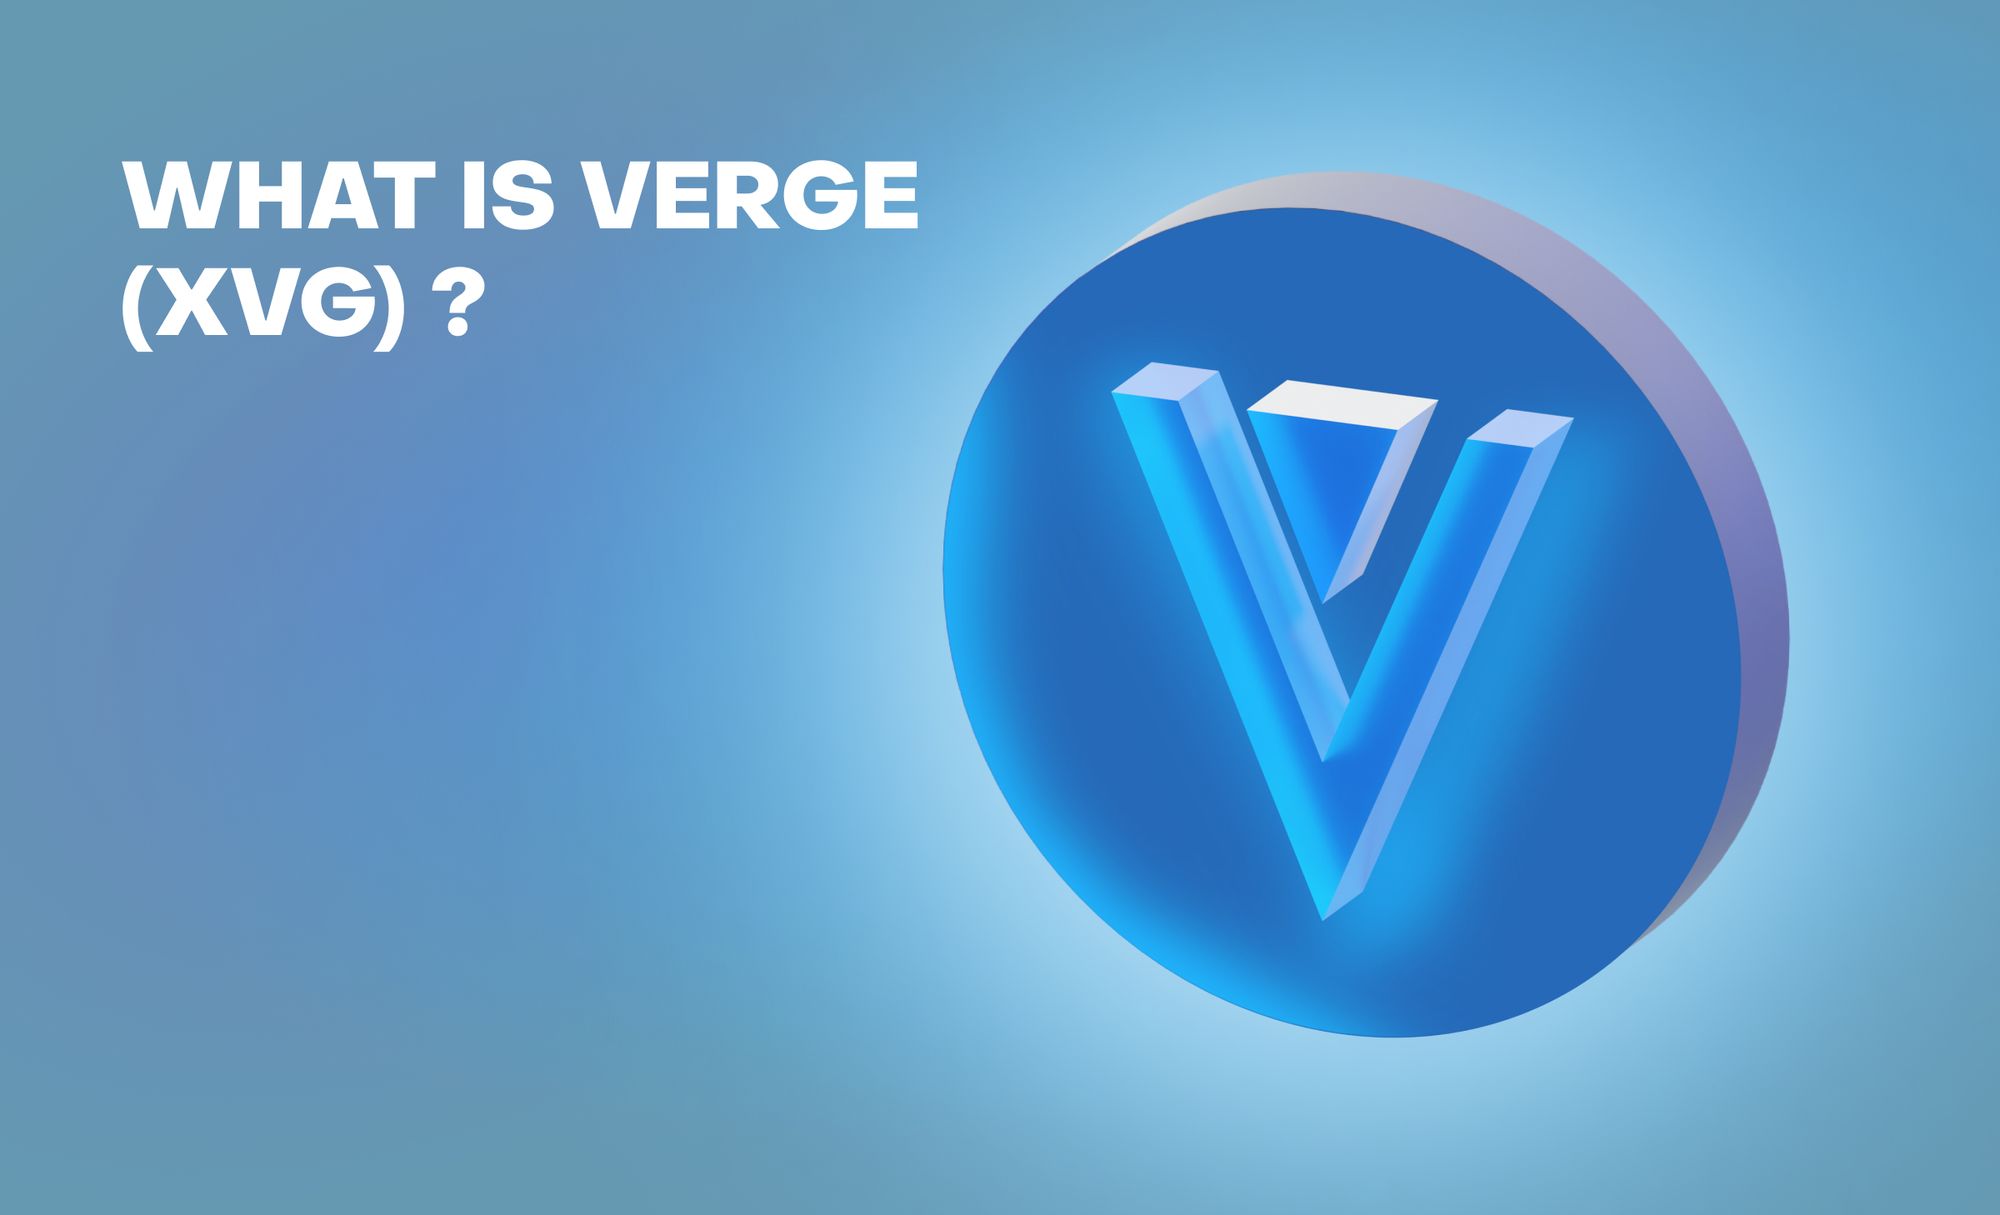 What Is Verge (XVG)?